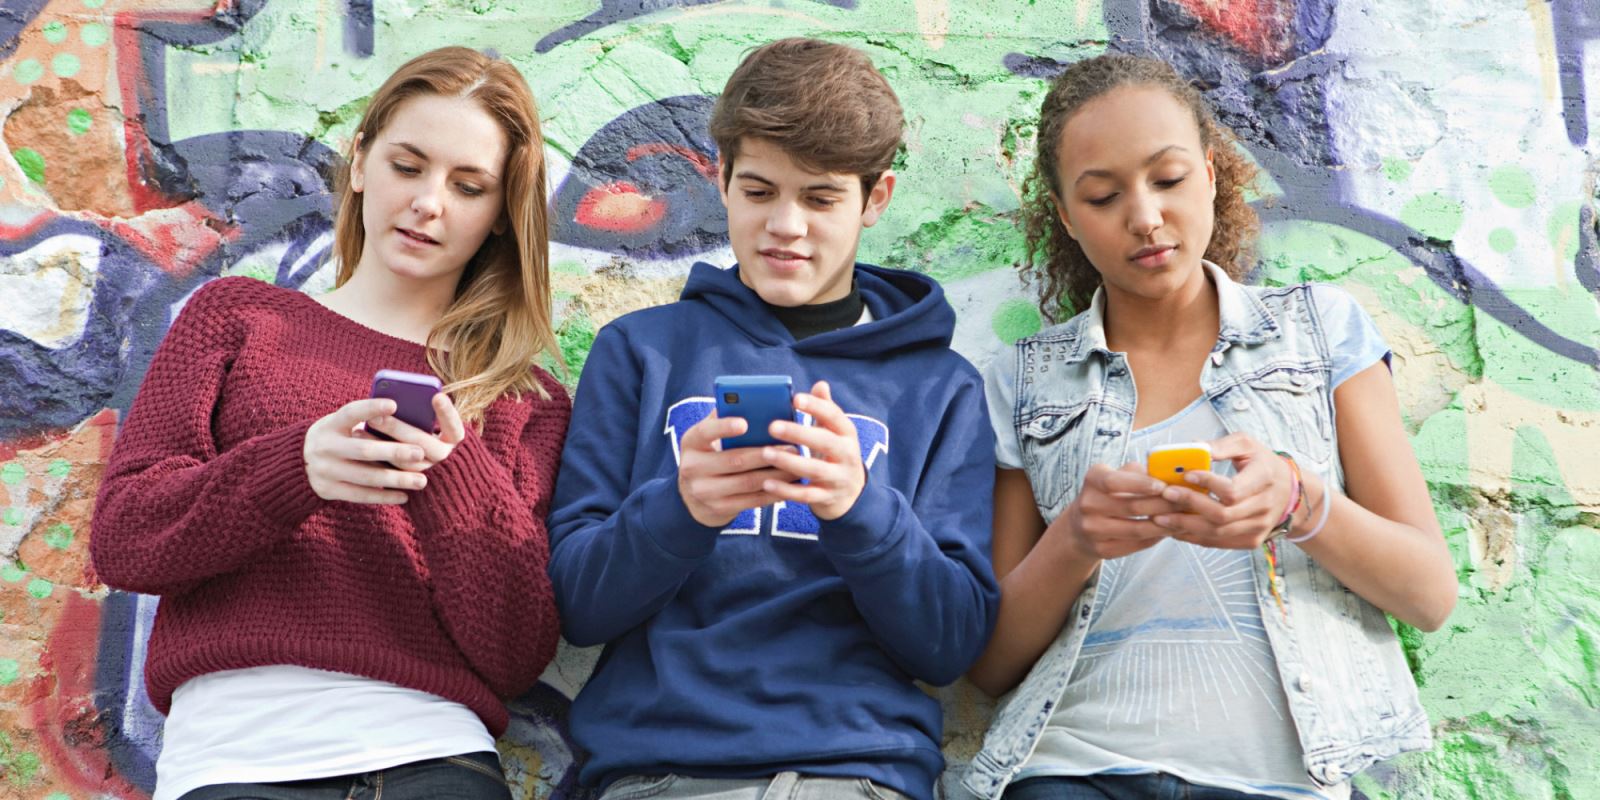 Cell Phone Use Hazards, Specially for Teens